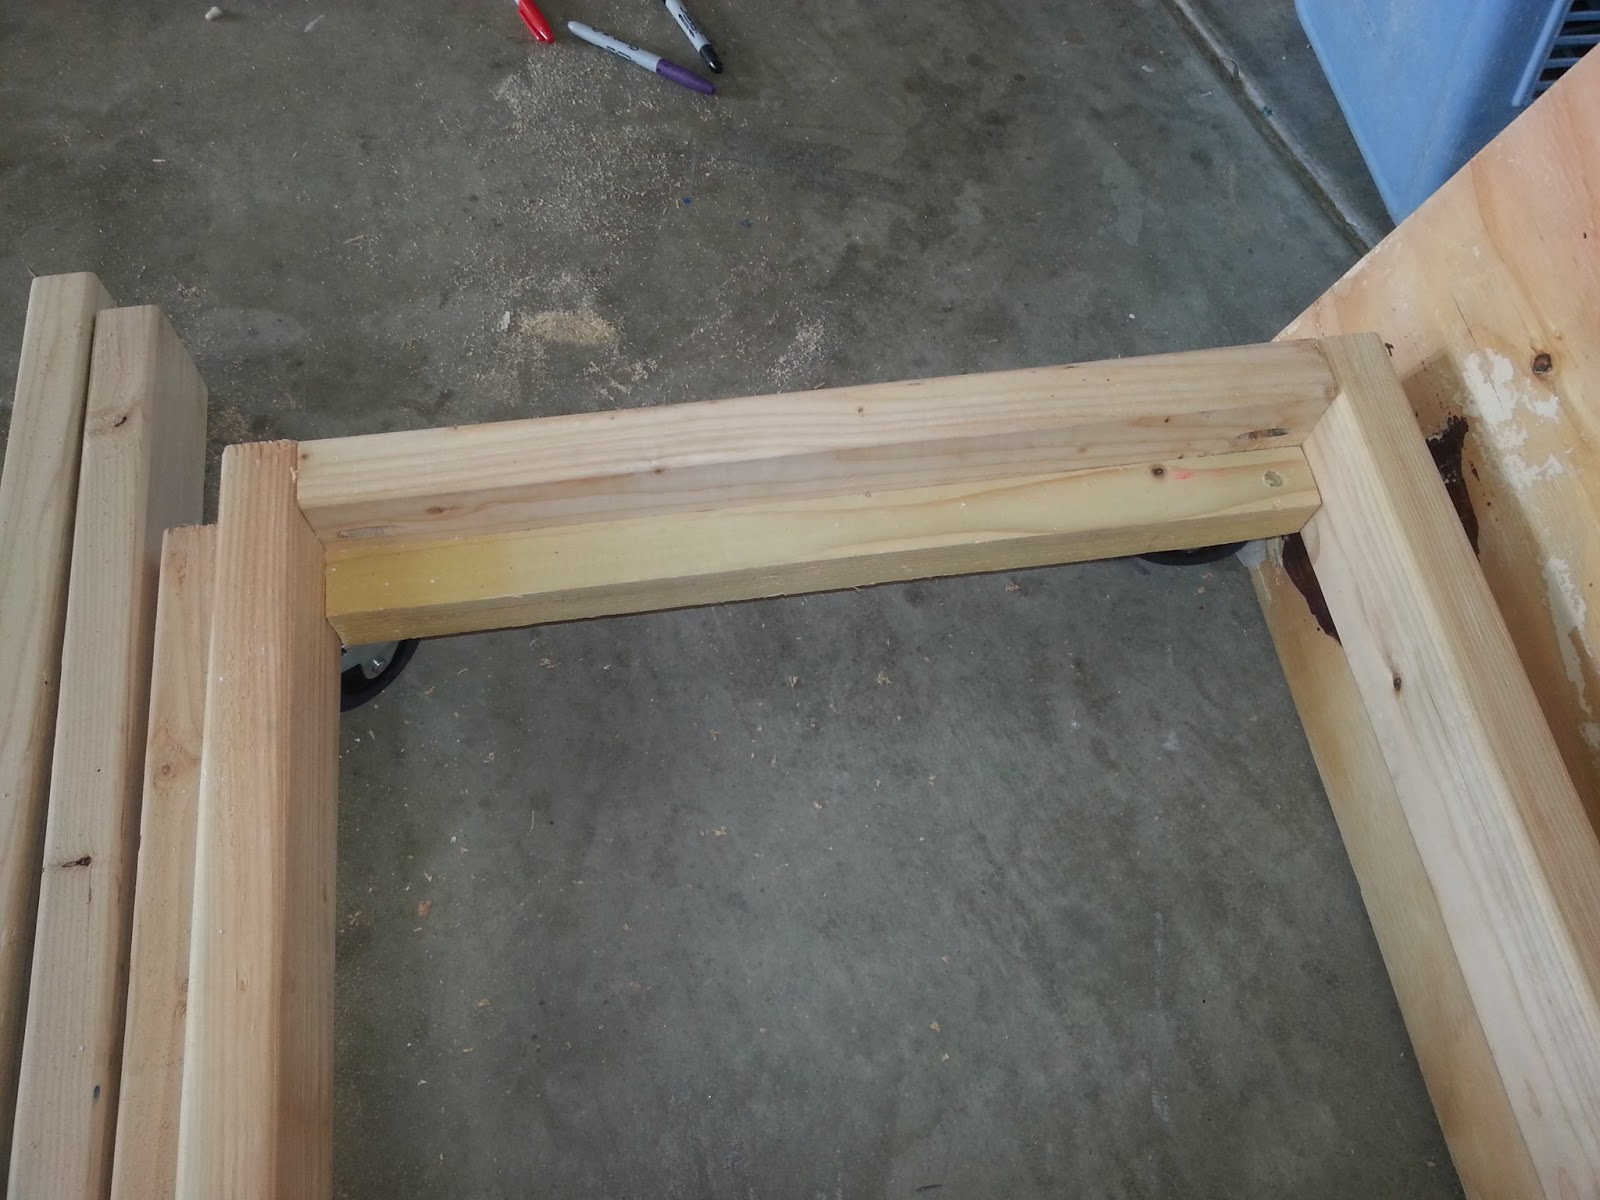  DIY Guy's Projects: Building a Miter Saw Bench - Economical but Beefy